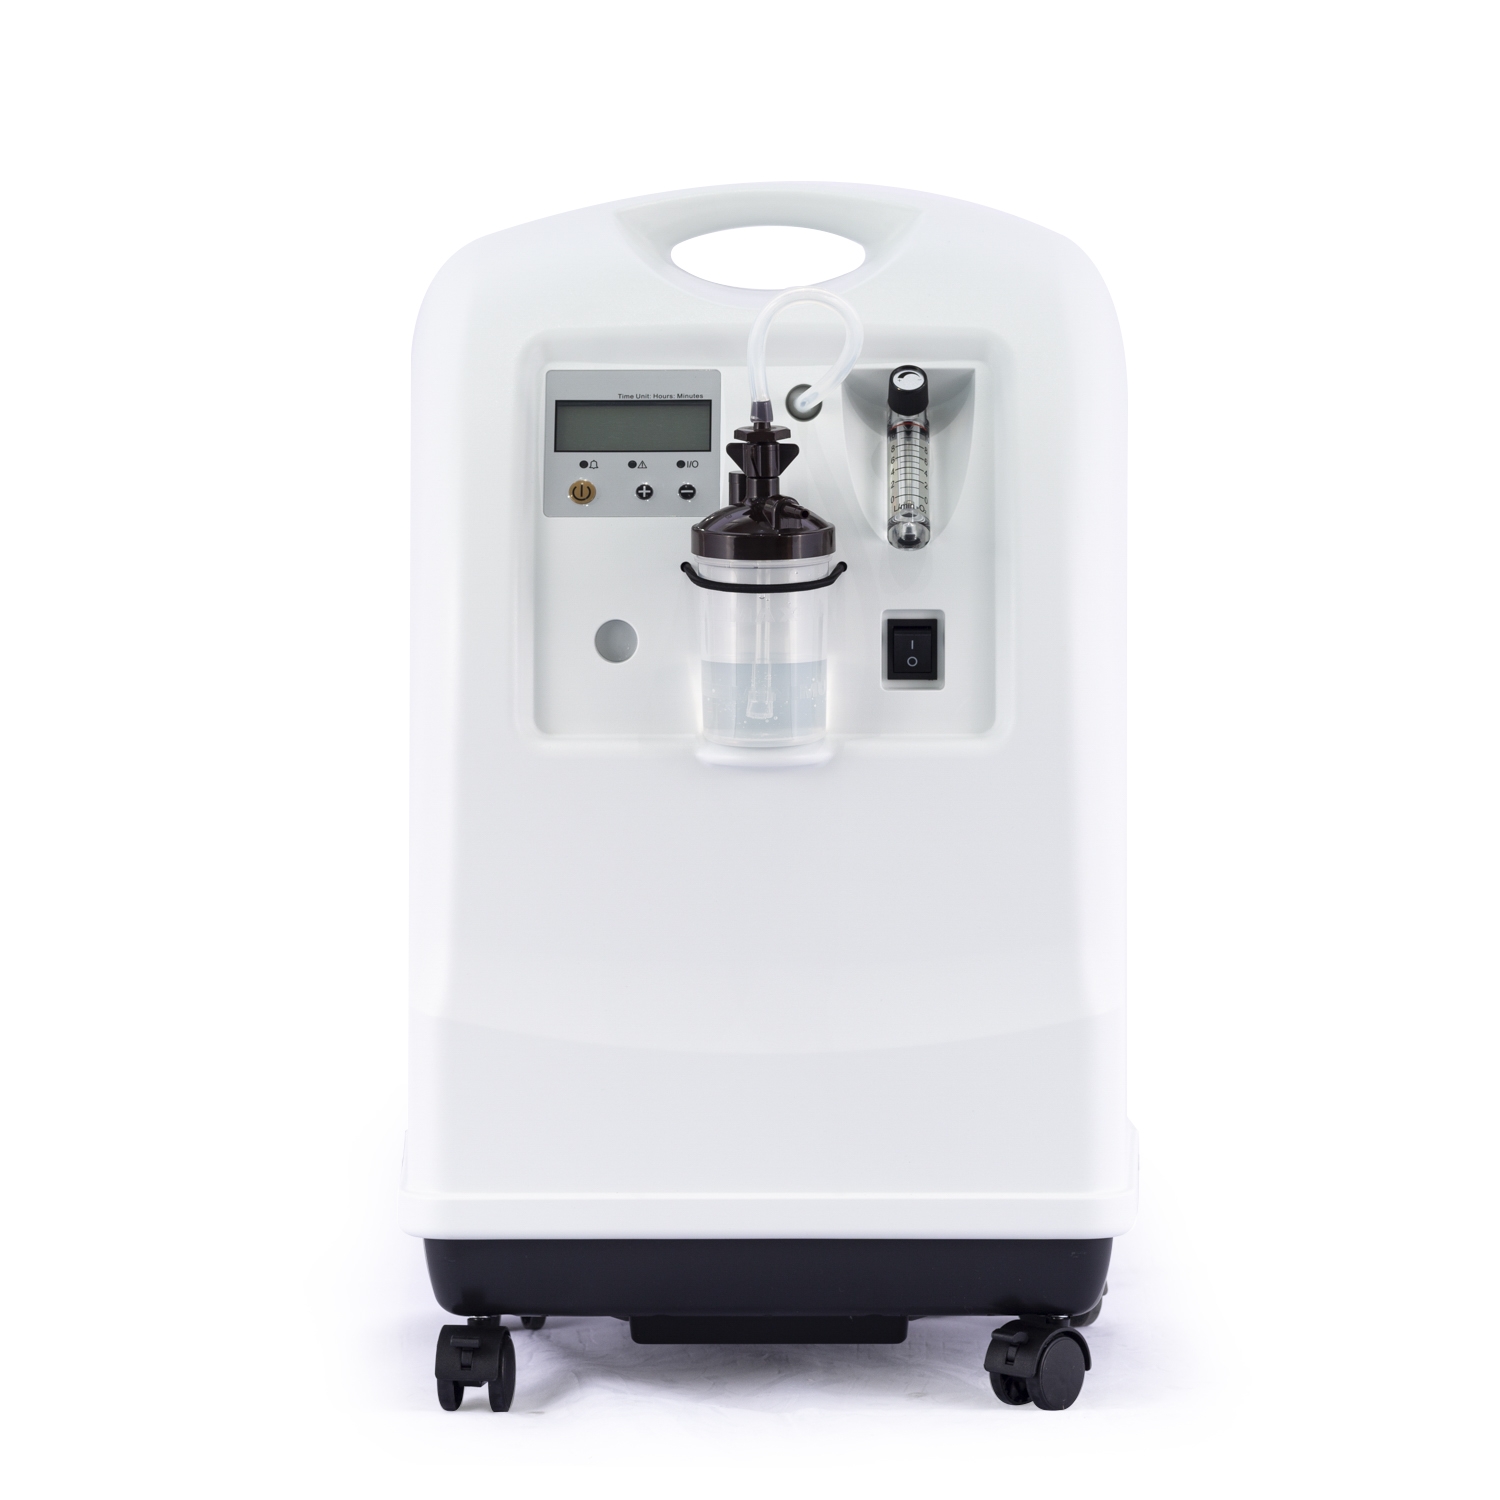 High flow 10L oxygen concentrator high pressure output suitable for ventilator Cpap and Bipap and homefill